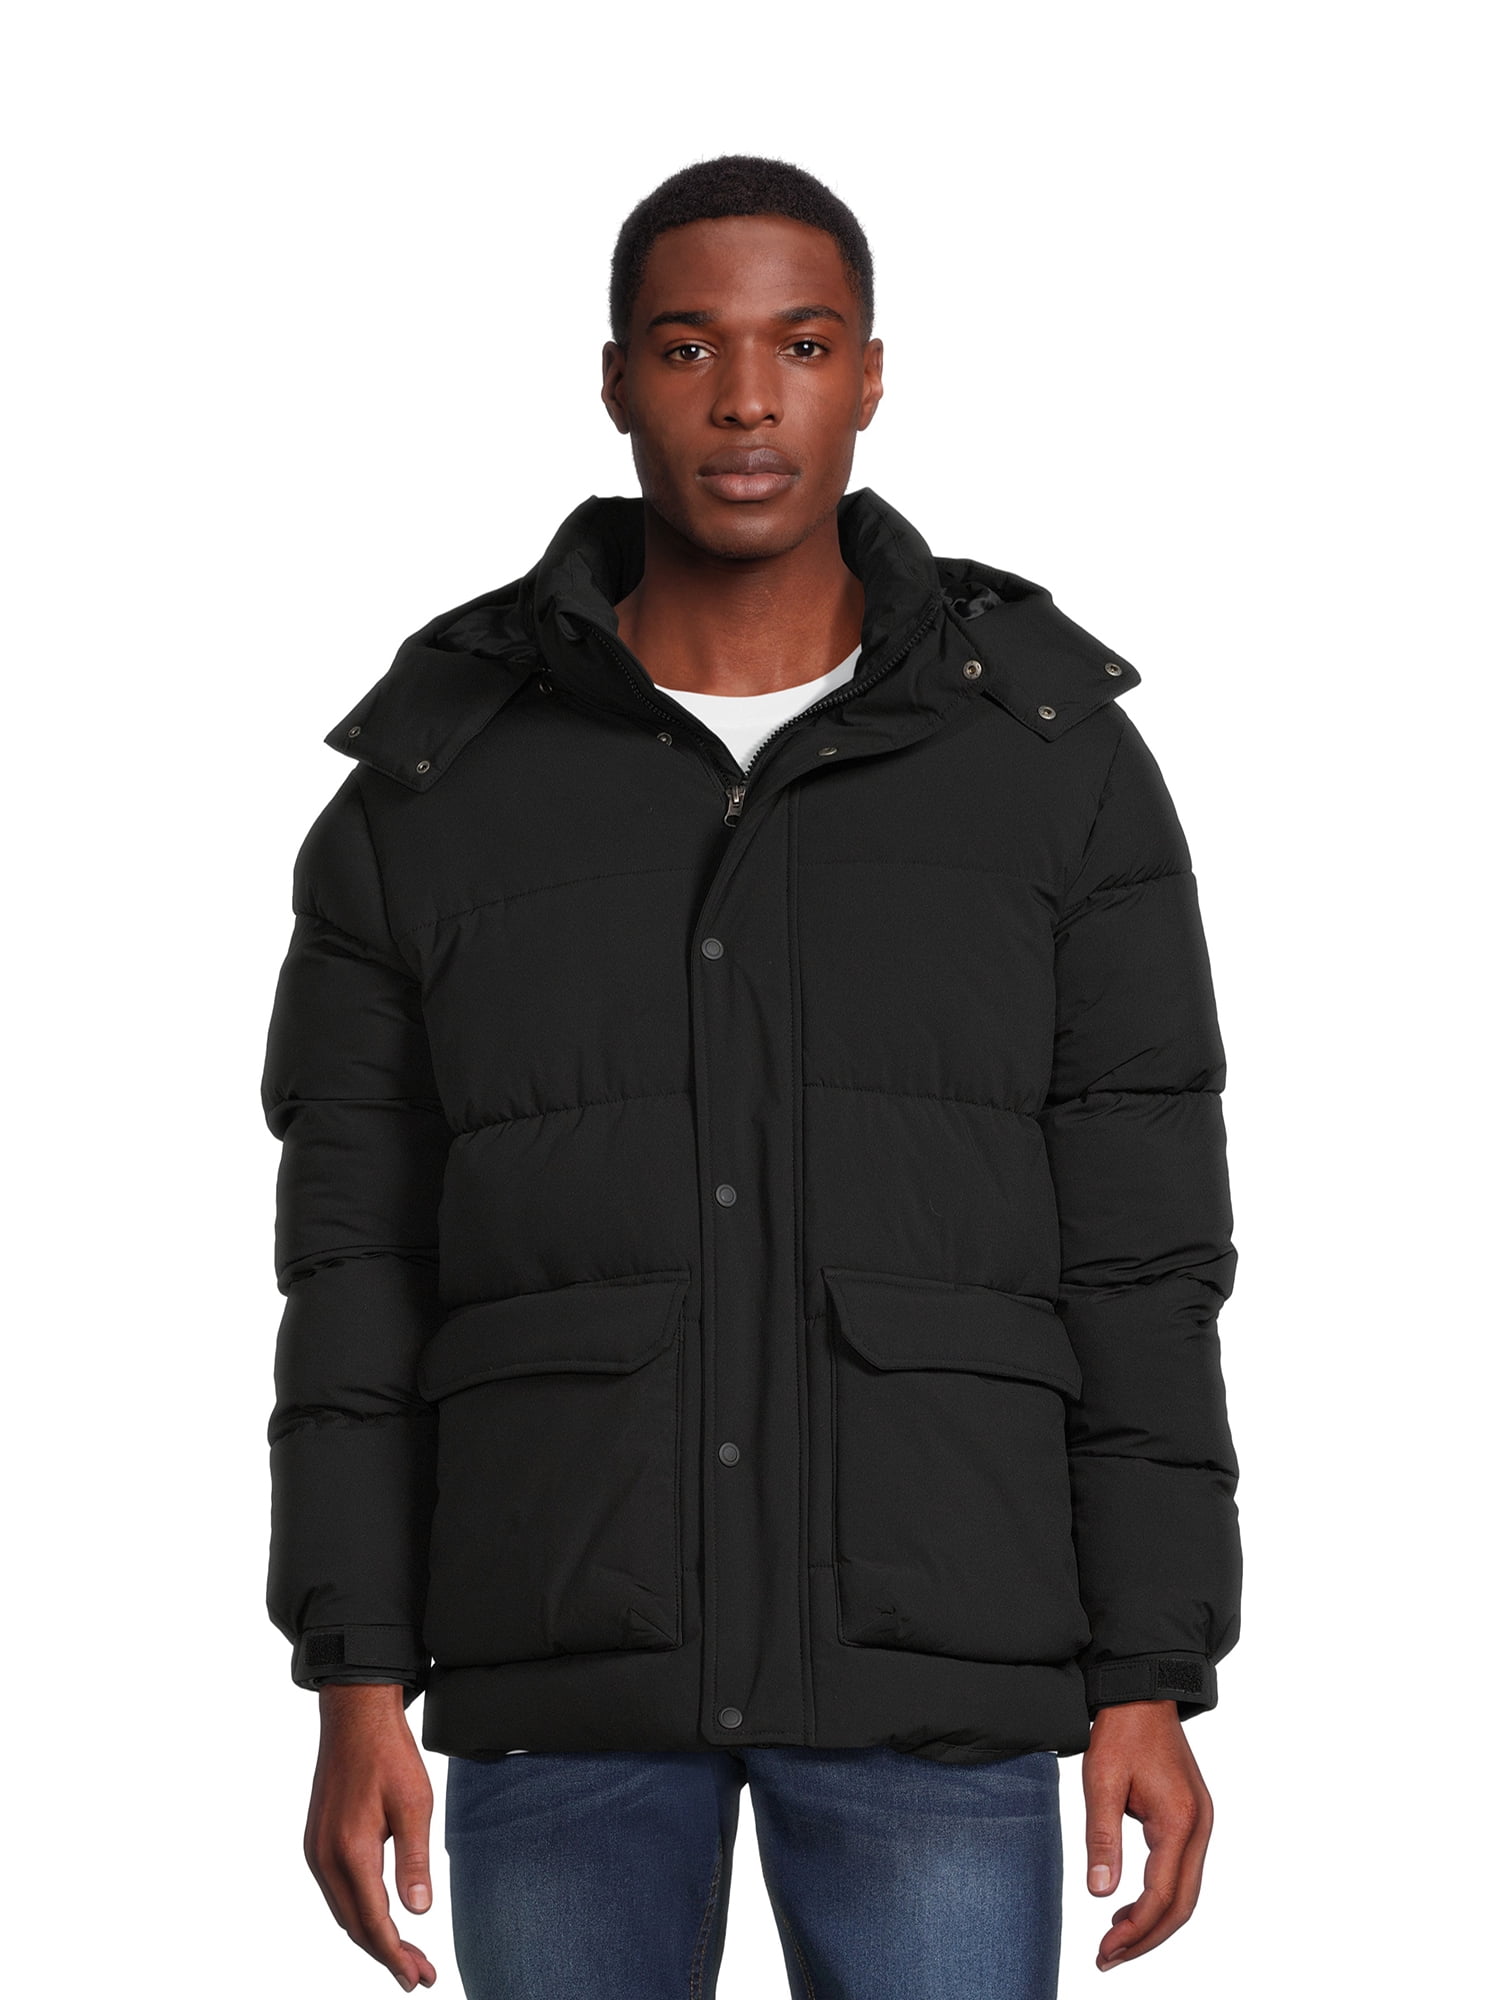 Swiss Tech Men's Quilted Puffer Jacket with Removable Hood, Sizes S-3XL ...